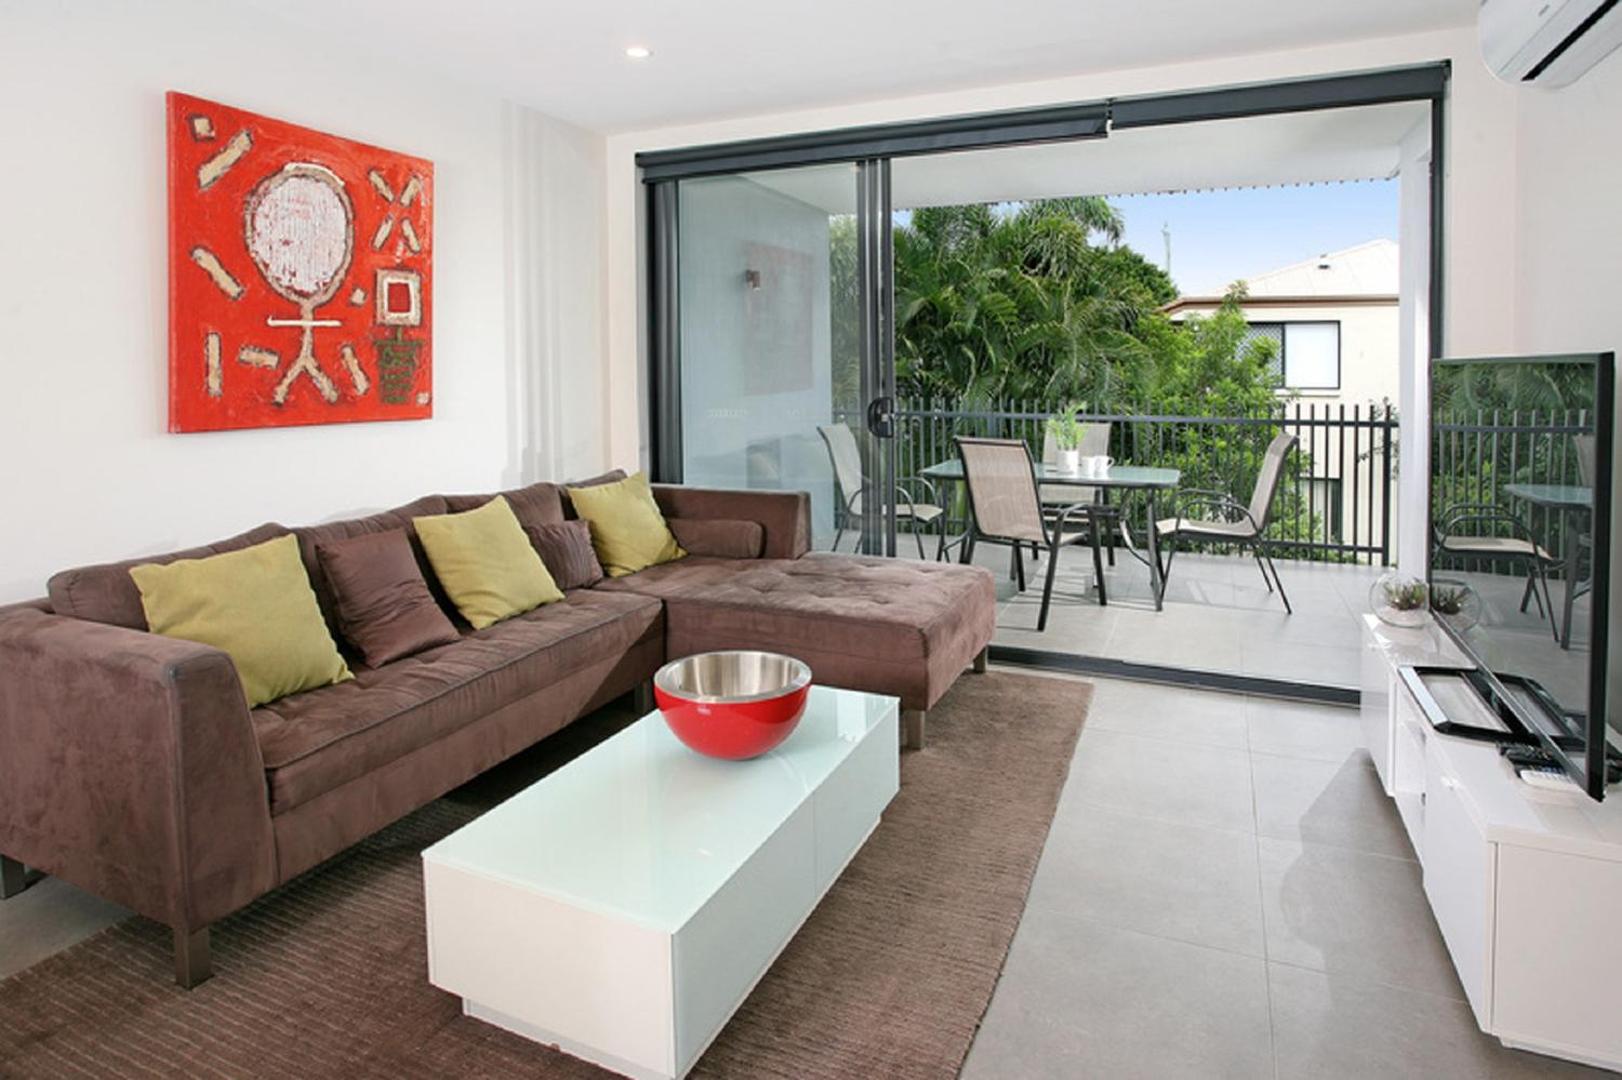 Back of the Block Bulimba – Executive 3BR Bulimba apartment with leafy outlook